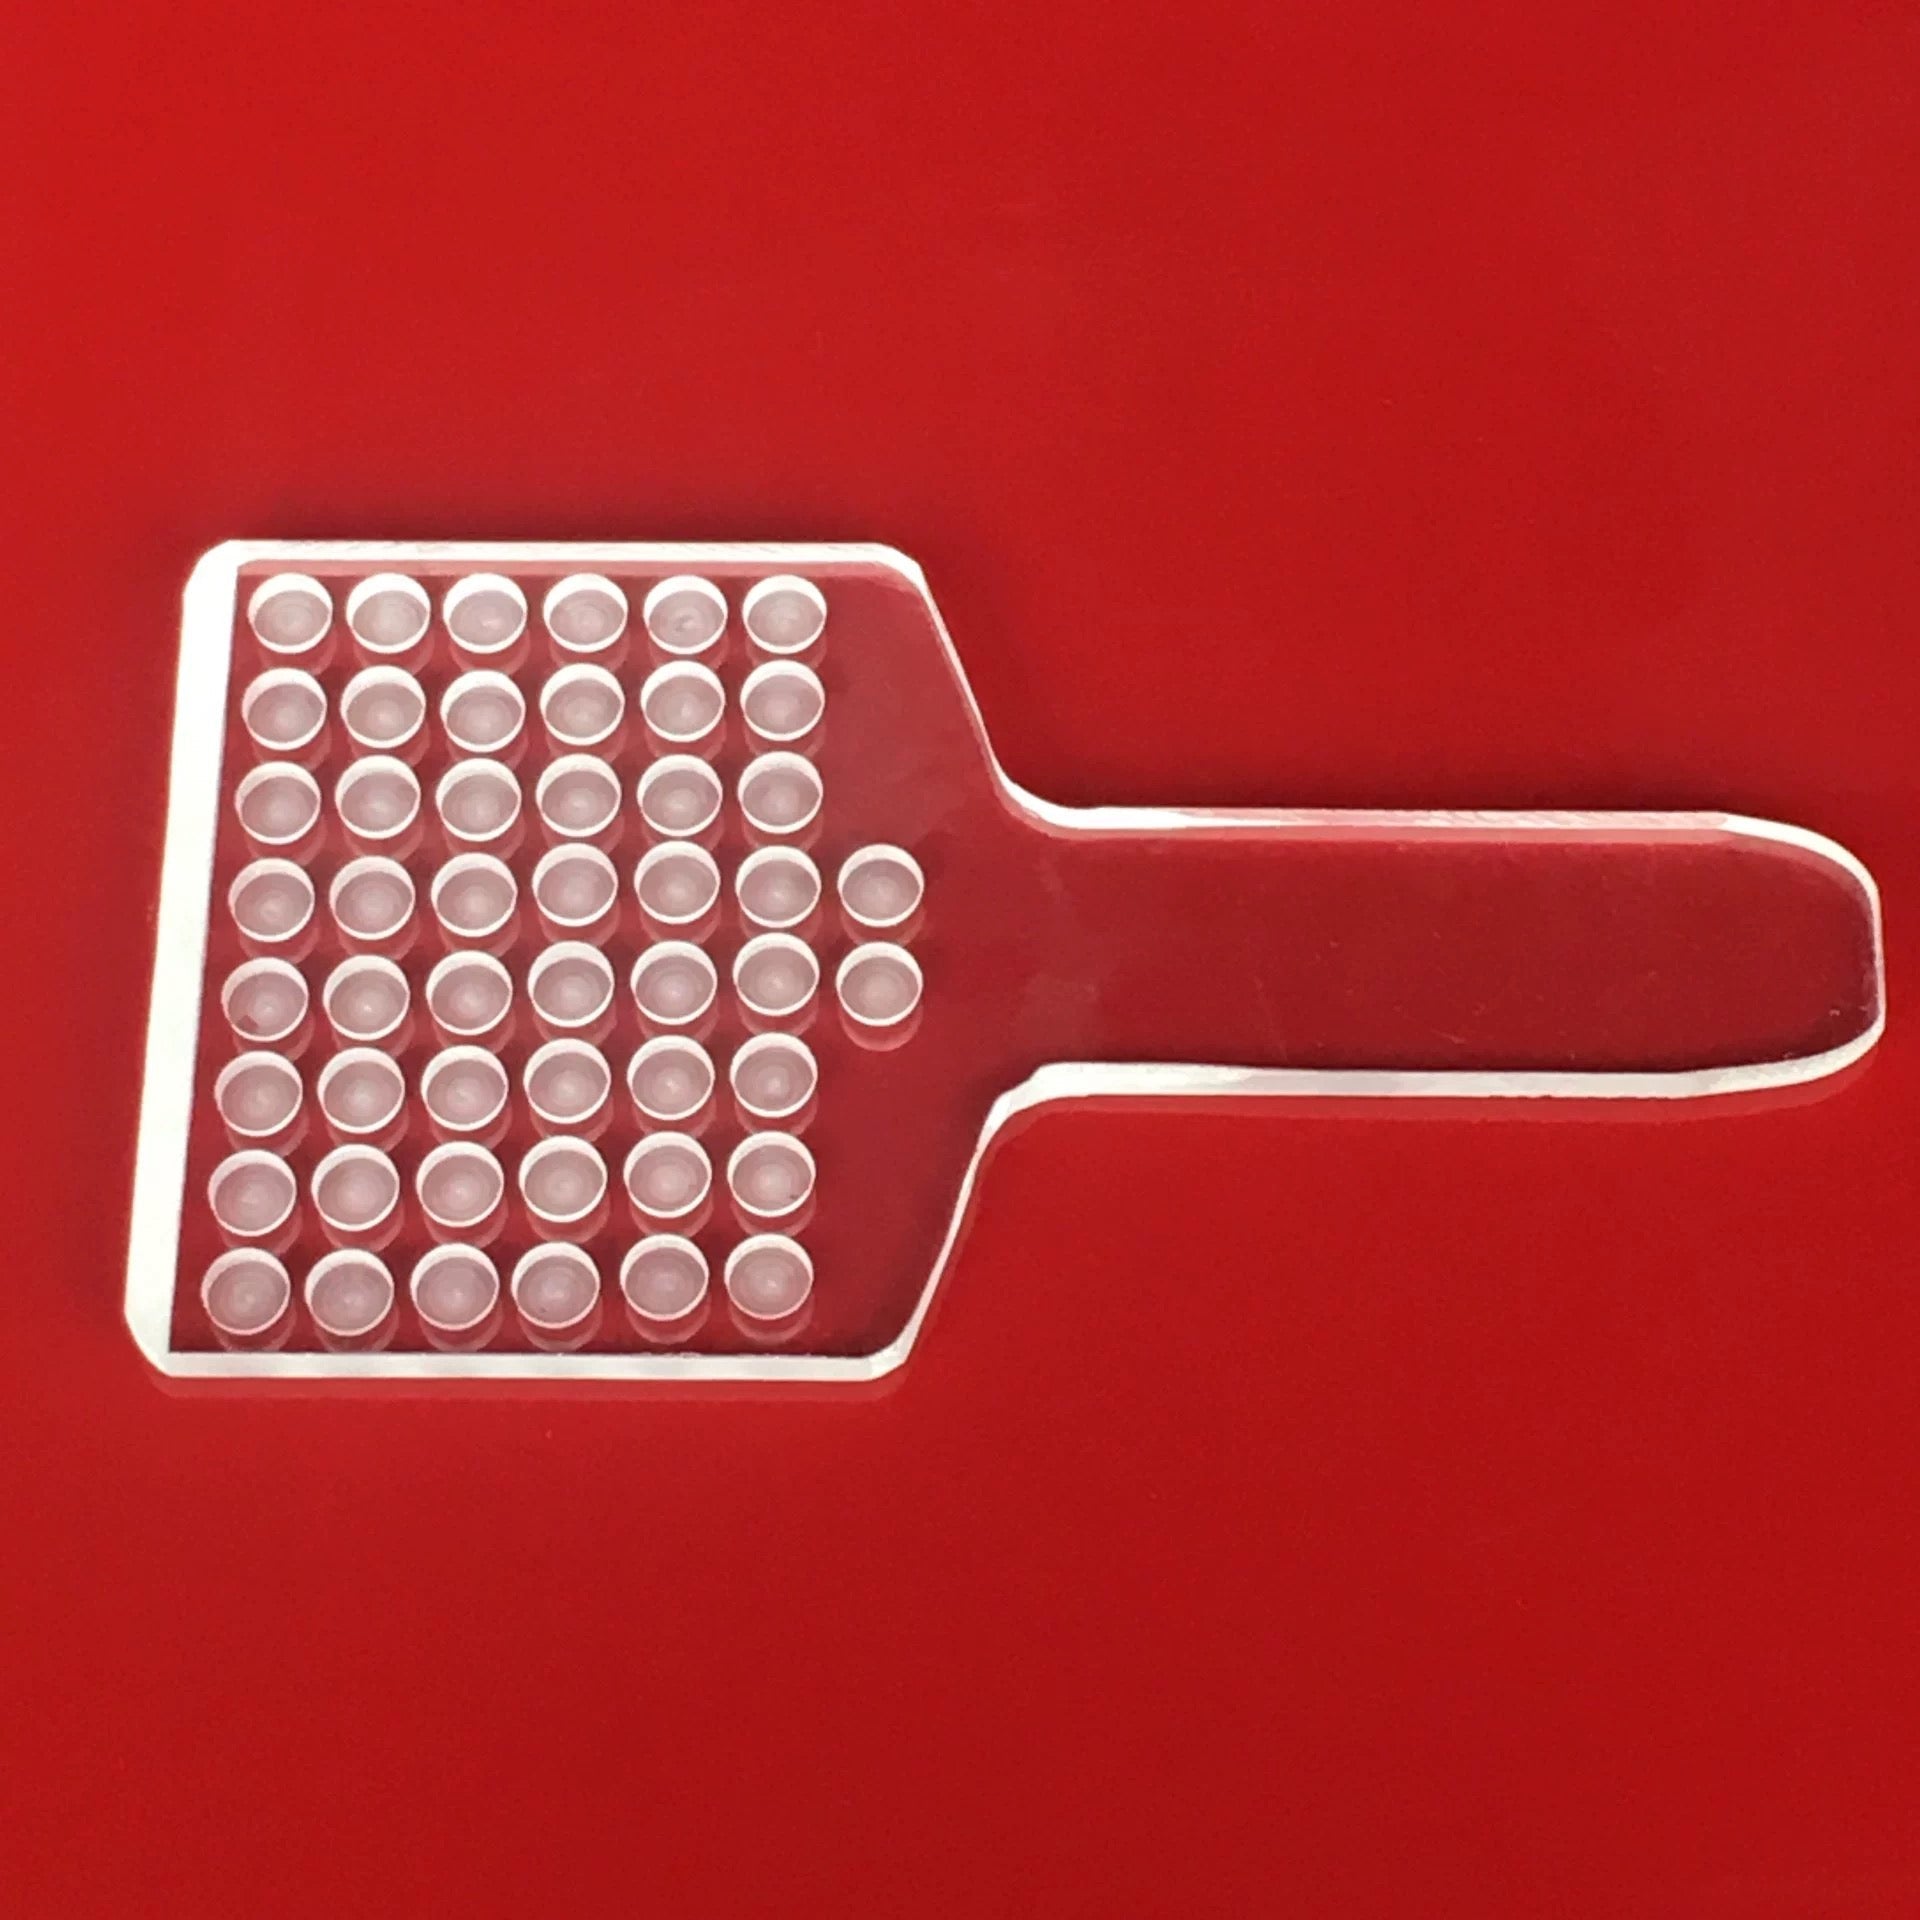 30-Hole Manual Tablet Counter Tray 10mm